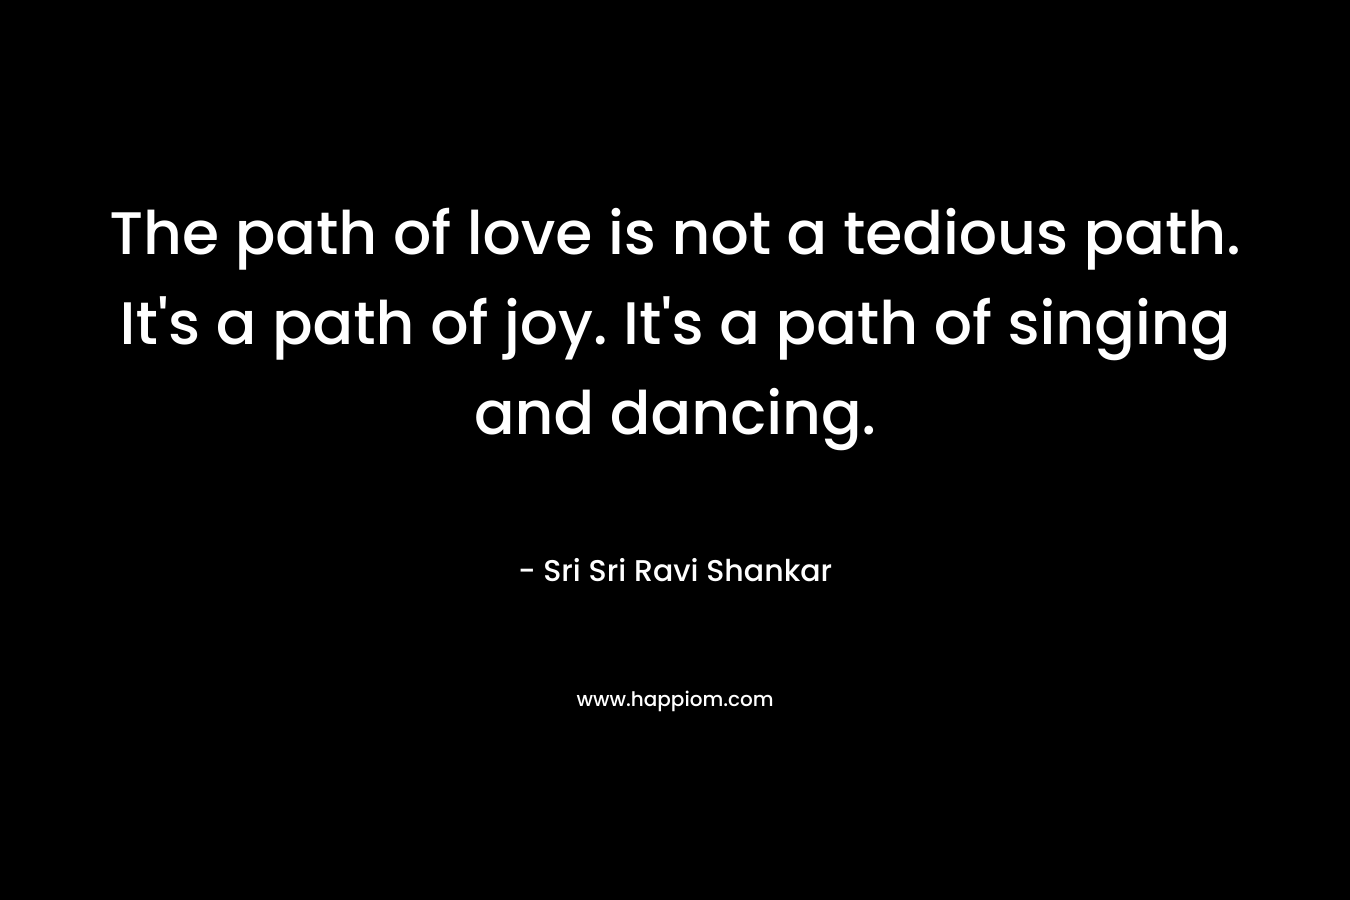 The path of love is not a tedious path. It's a path of joy. It's a path of singing and dancing.